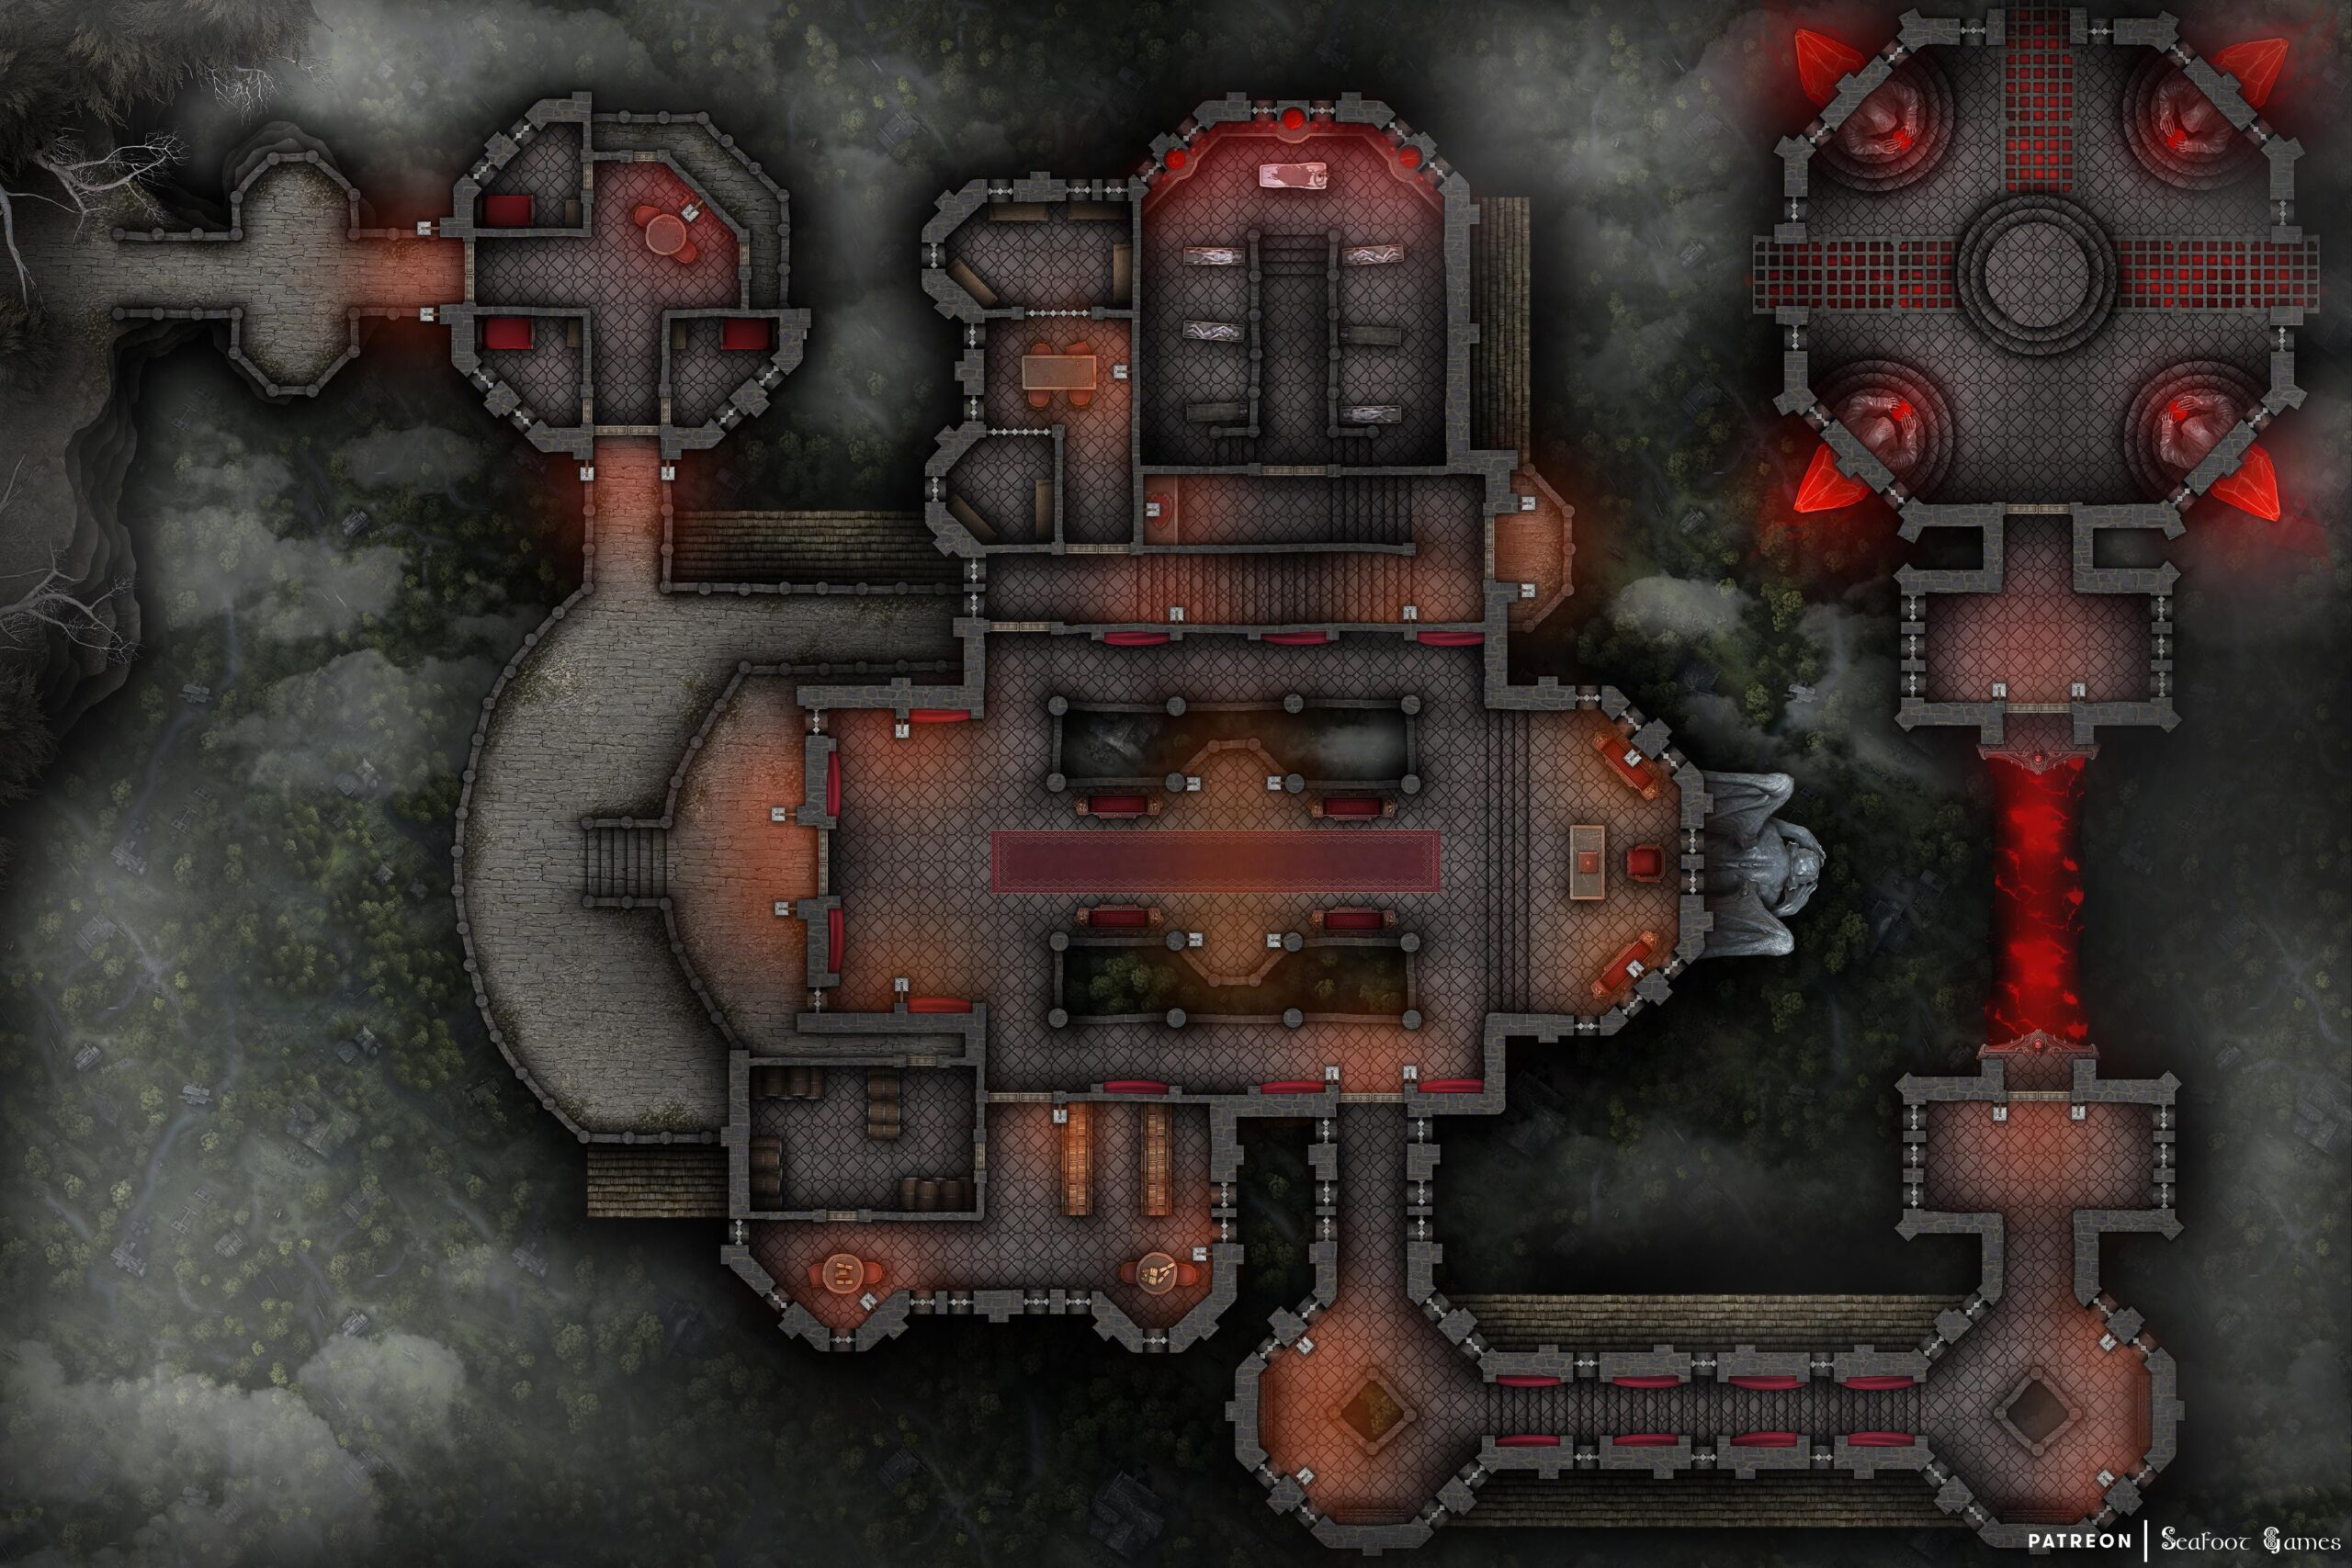 Vampires Floating Blood Citadel Free 60x40 Battlemap, with leery red lighting and gothic design. VTT ready!